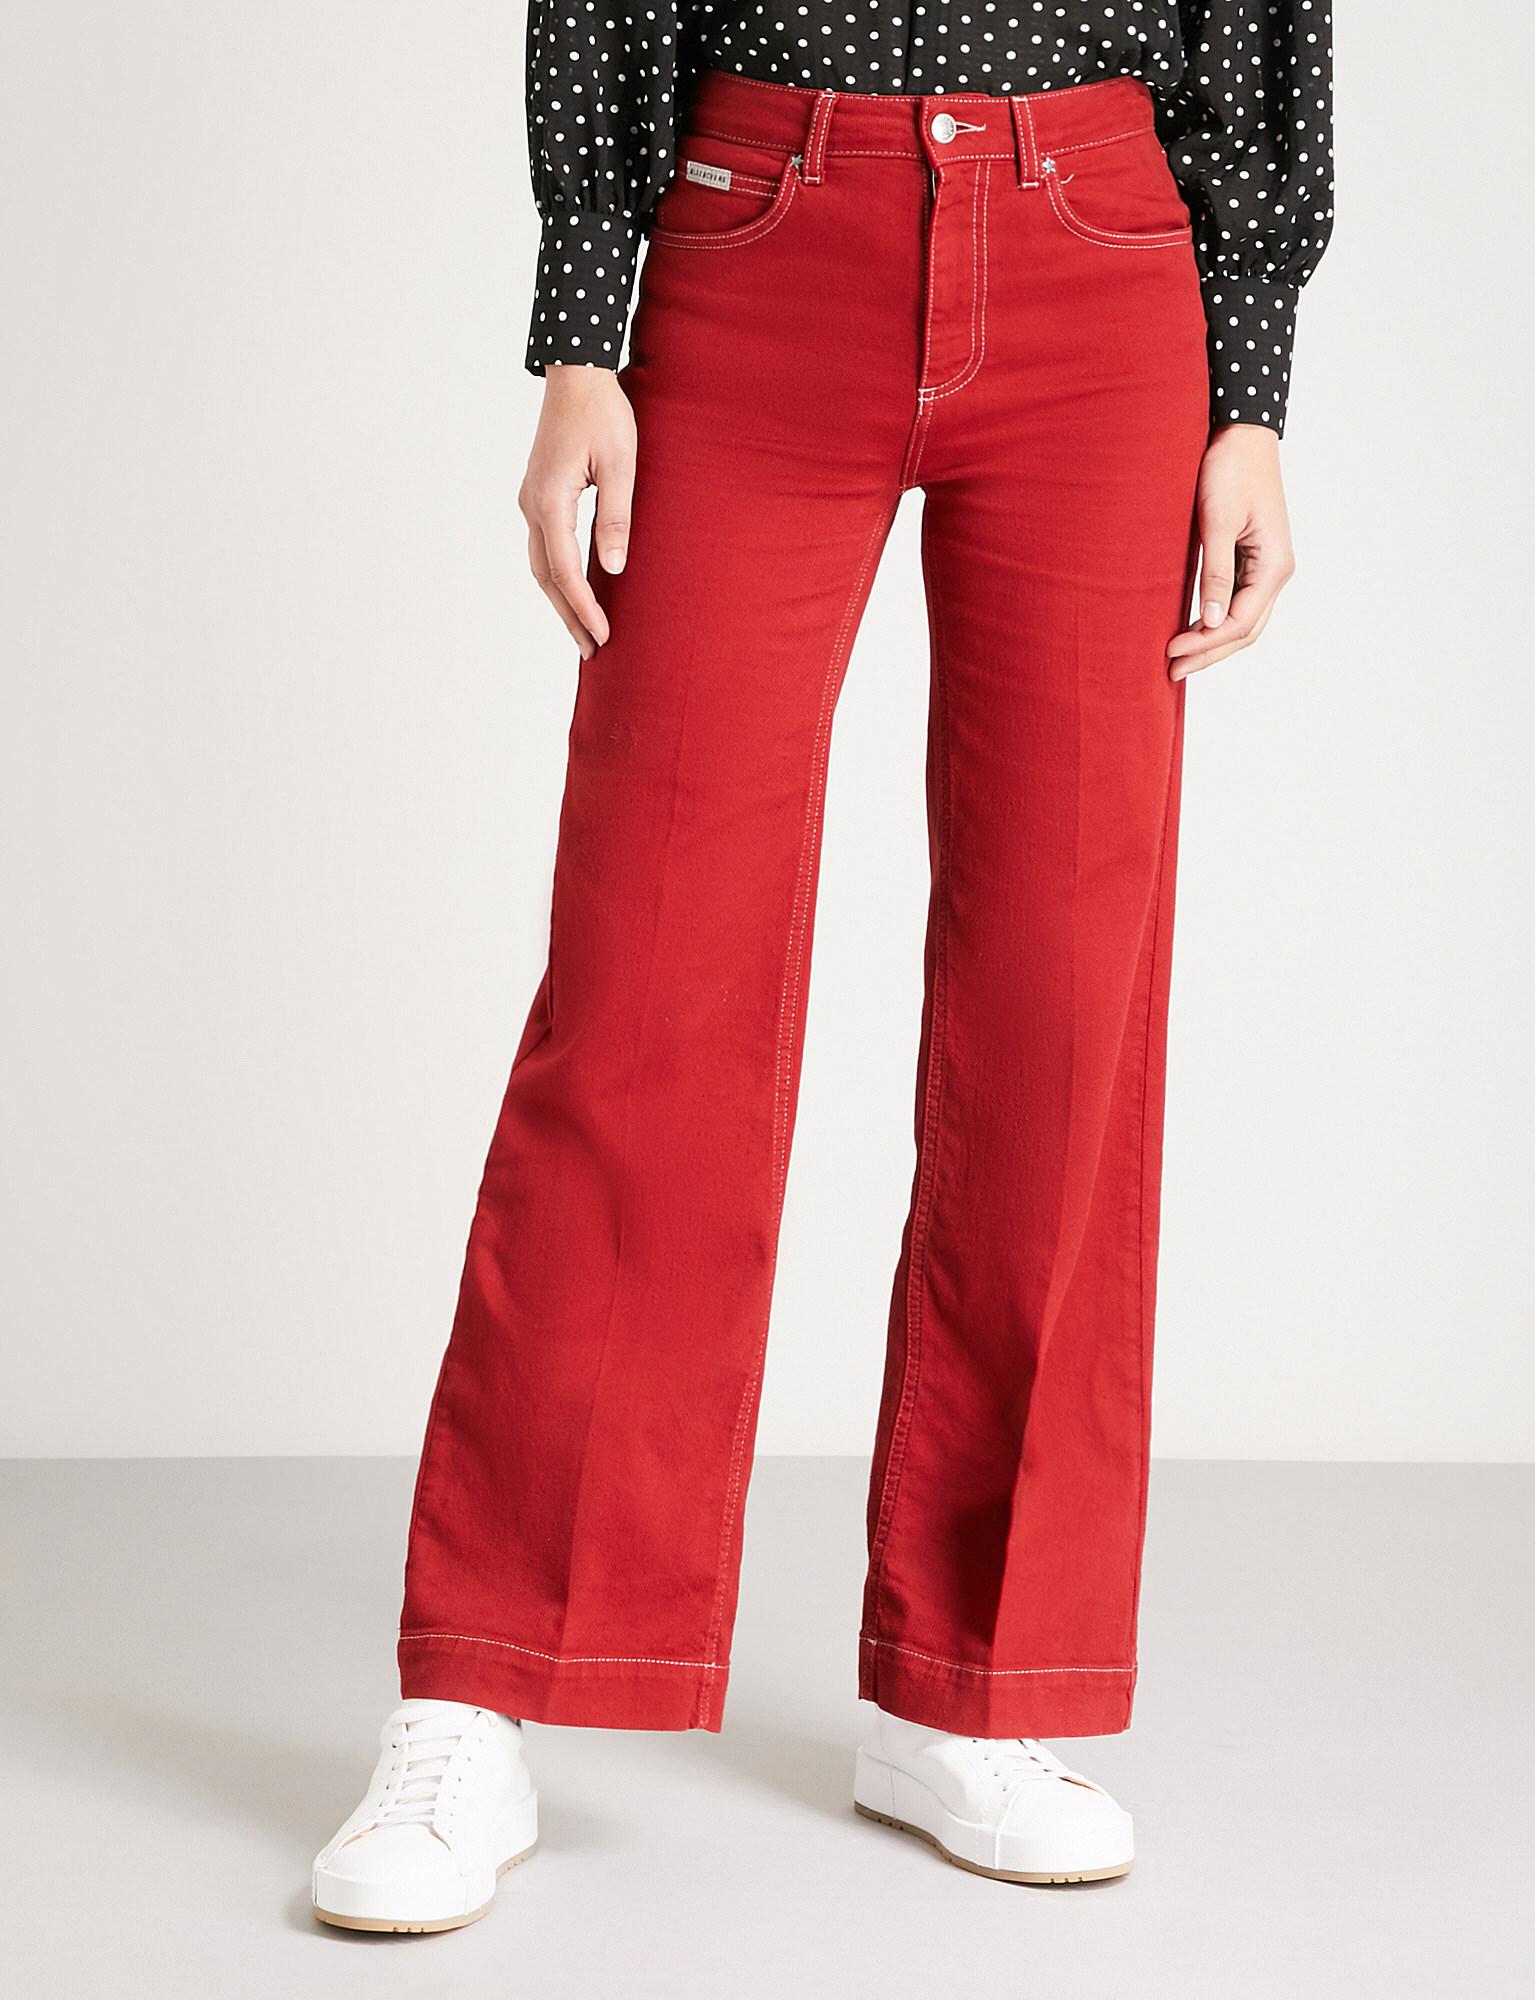 ALEXACHUNG Wide-leg High-rise Jeans in Red | Lyst